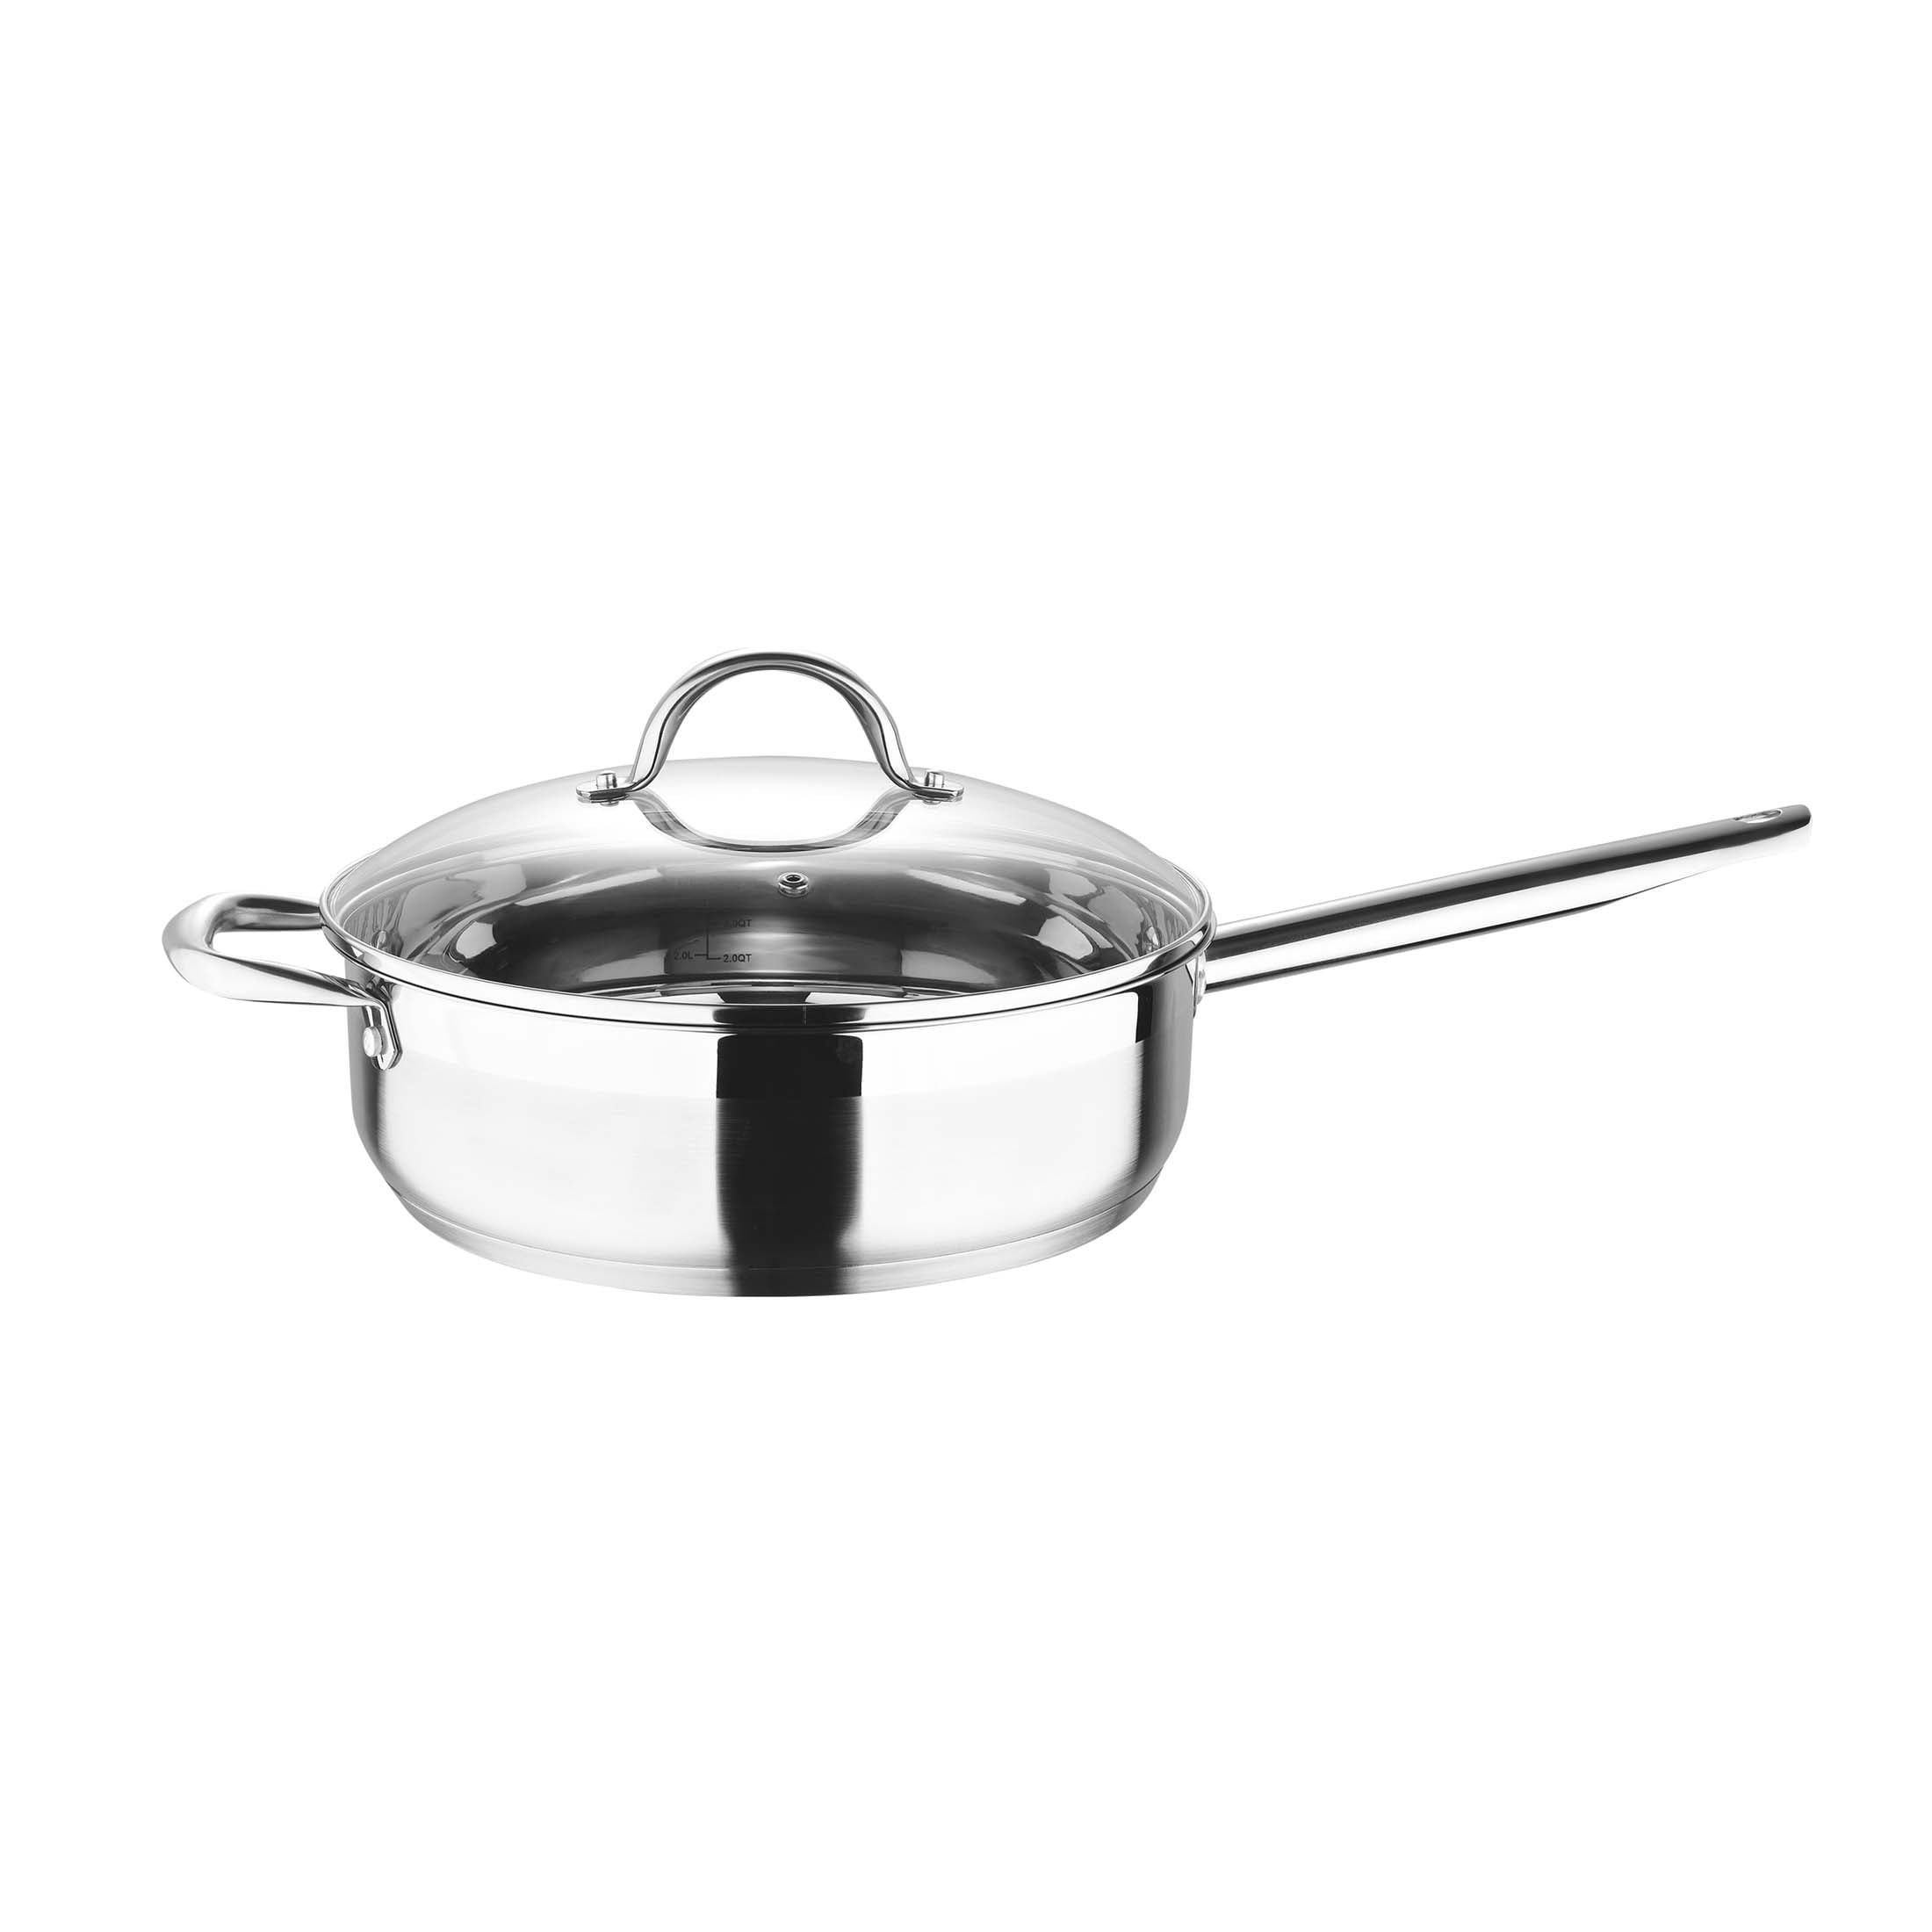 Voorstad schokkend welvaart Gourmet by Bergner - 5 Qt Stainless Steel Saute Pan with Vented Glass Lid  and Helper Handle, 5 Quarts, 11 Inches, Polished - Walmart.com